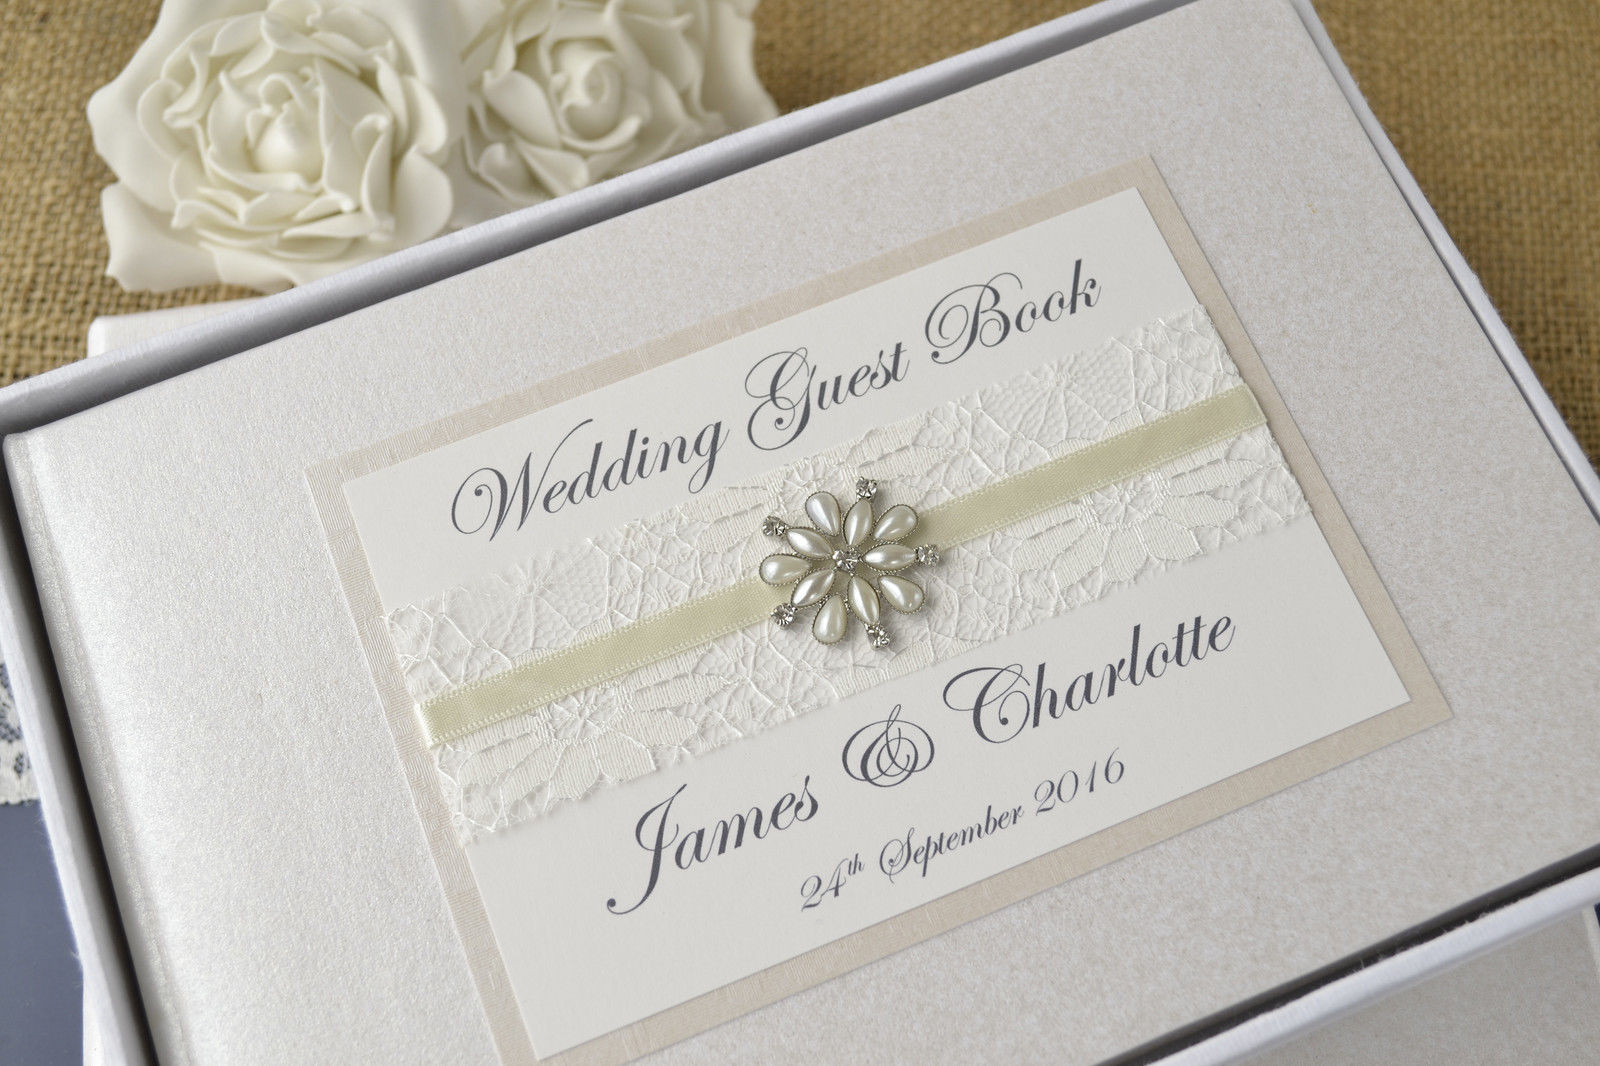 Wedding Guests Book
 Personalised Wedding Guest Book – Vintage lace & jewel